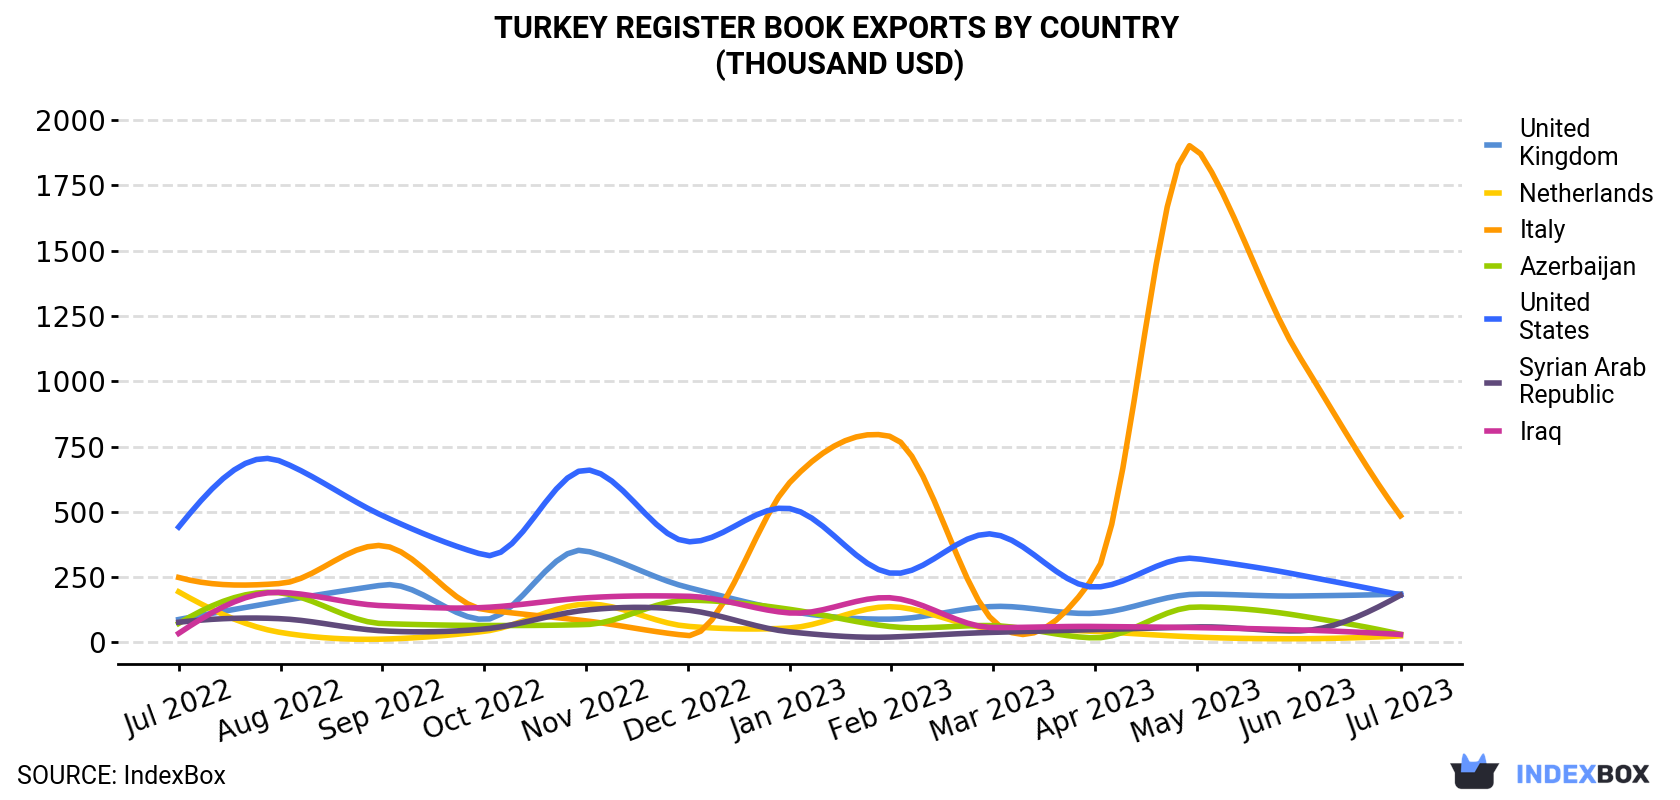 Turkey Register Book Exports By Country (Thousand USD)